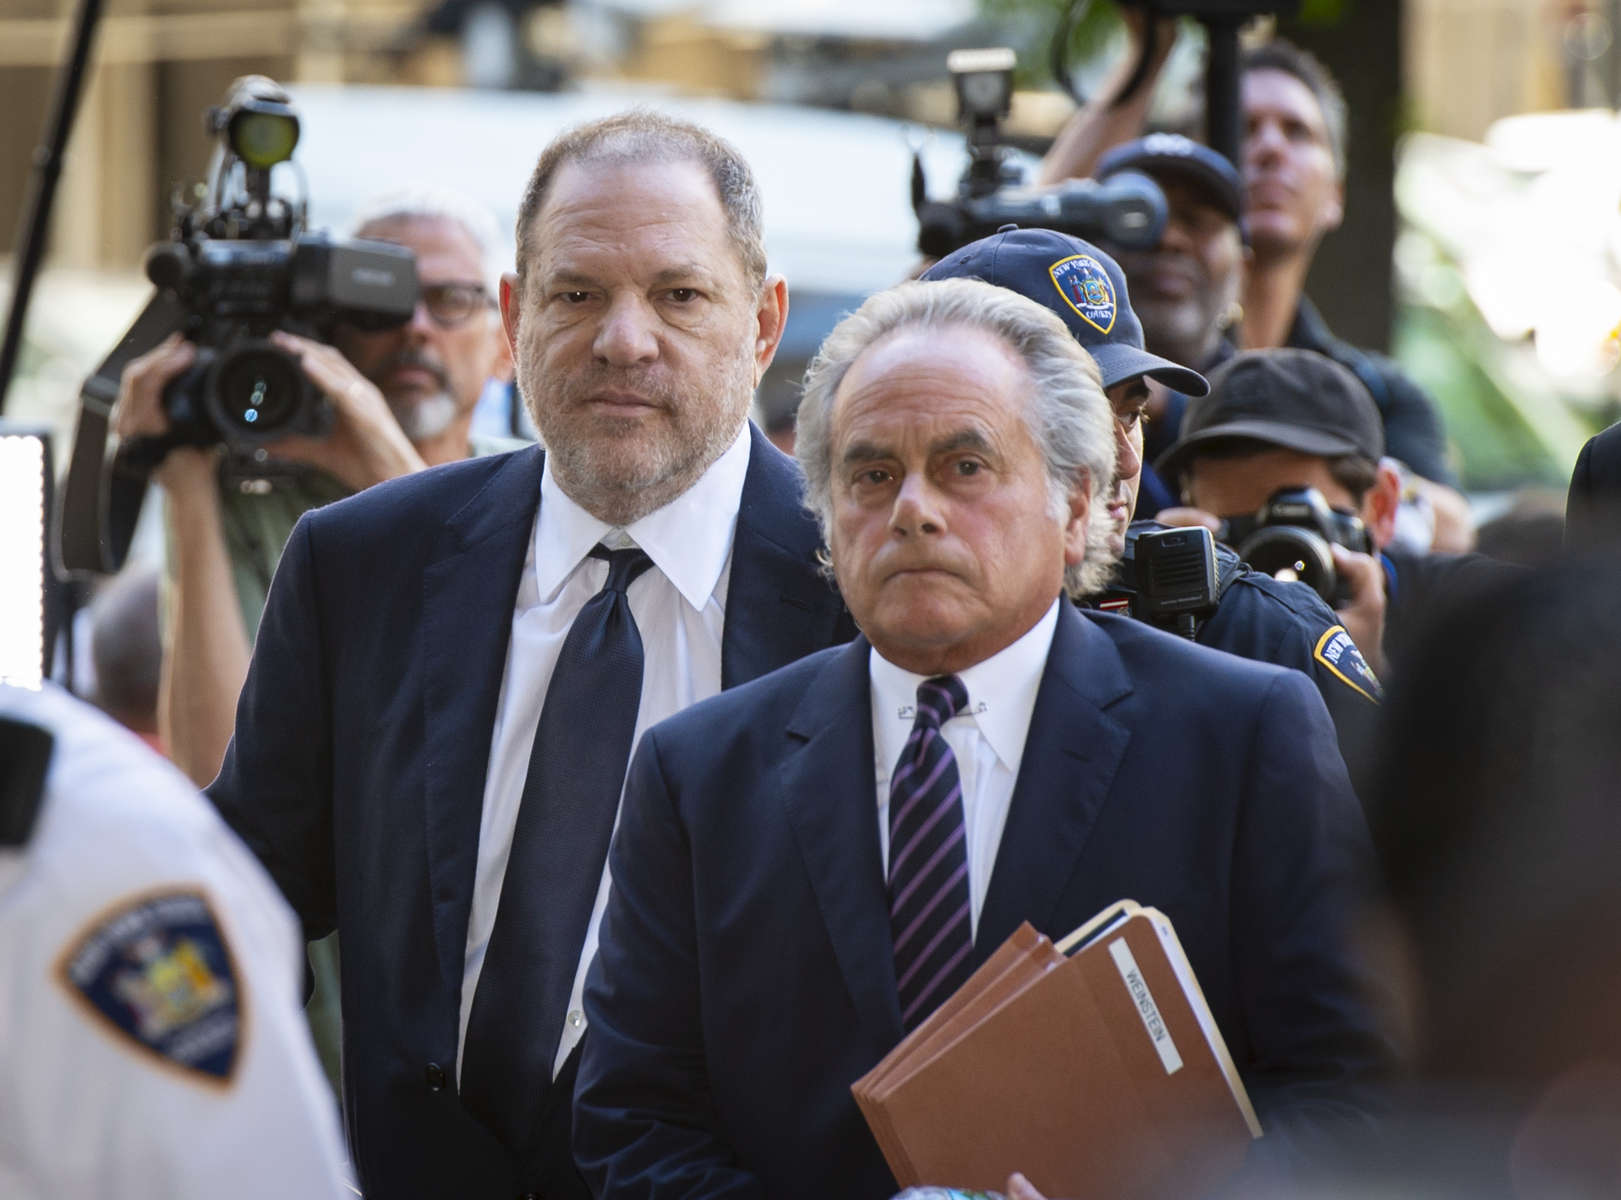 Former American film producer Harvey Weinstein, accused of two counts of rape and one first-degree criminal sex act, arrives with his lawyer Benjamin Brafman before pleading not guilty inside Manhattan Criminal Court in New York City on Tuesday, June 5, 2018.  